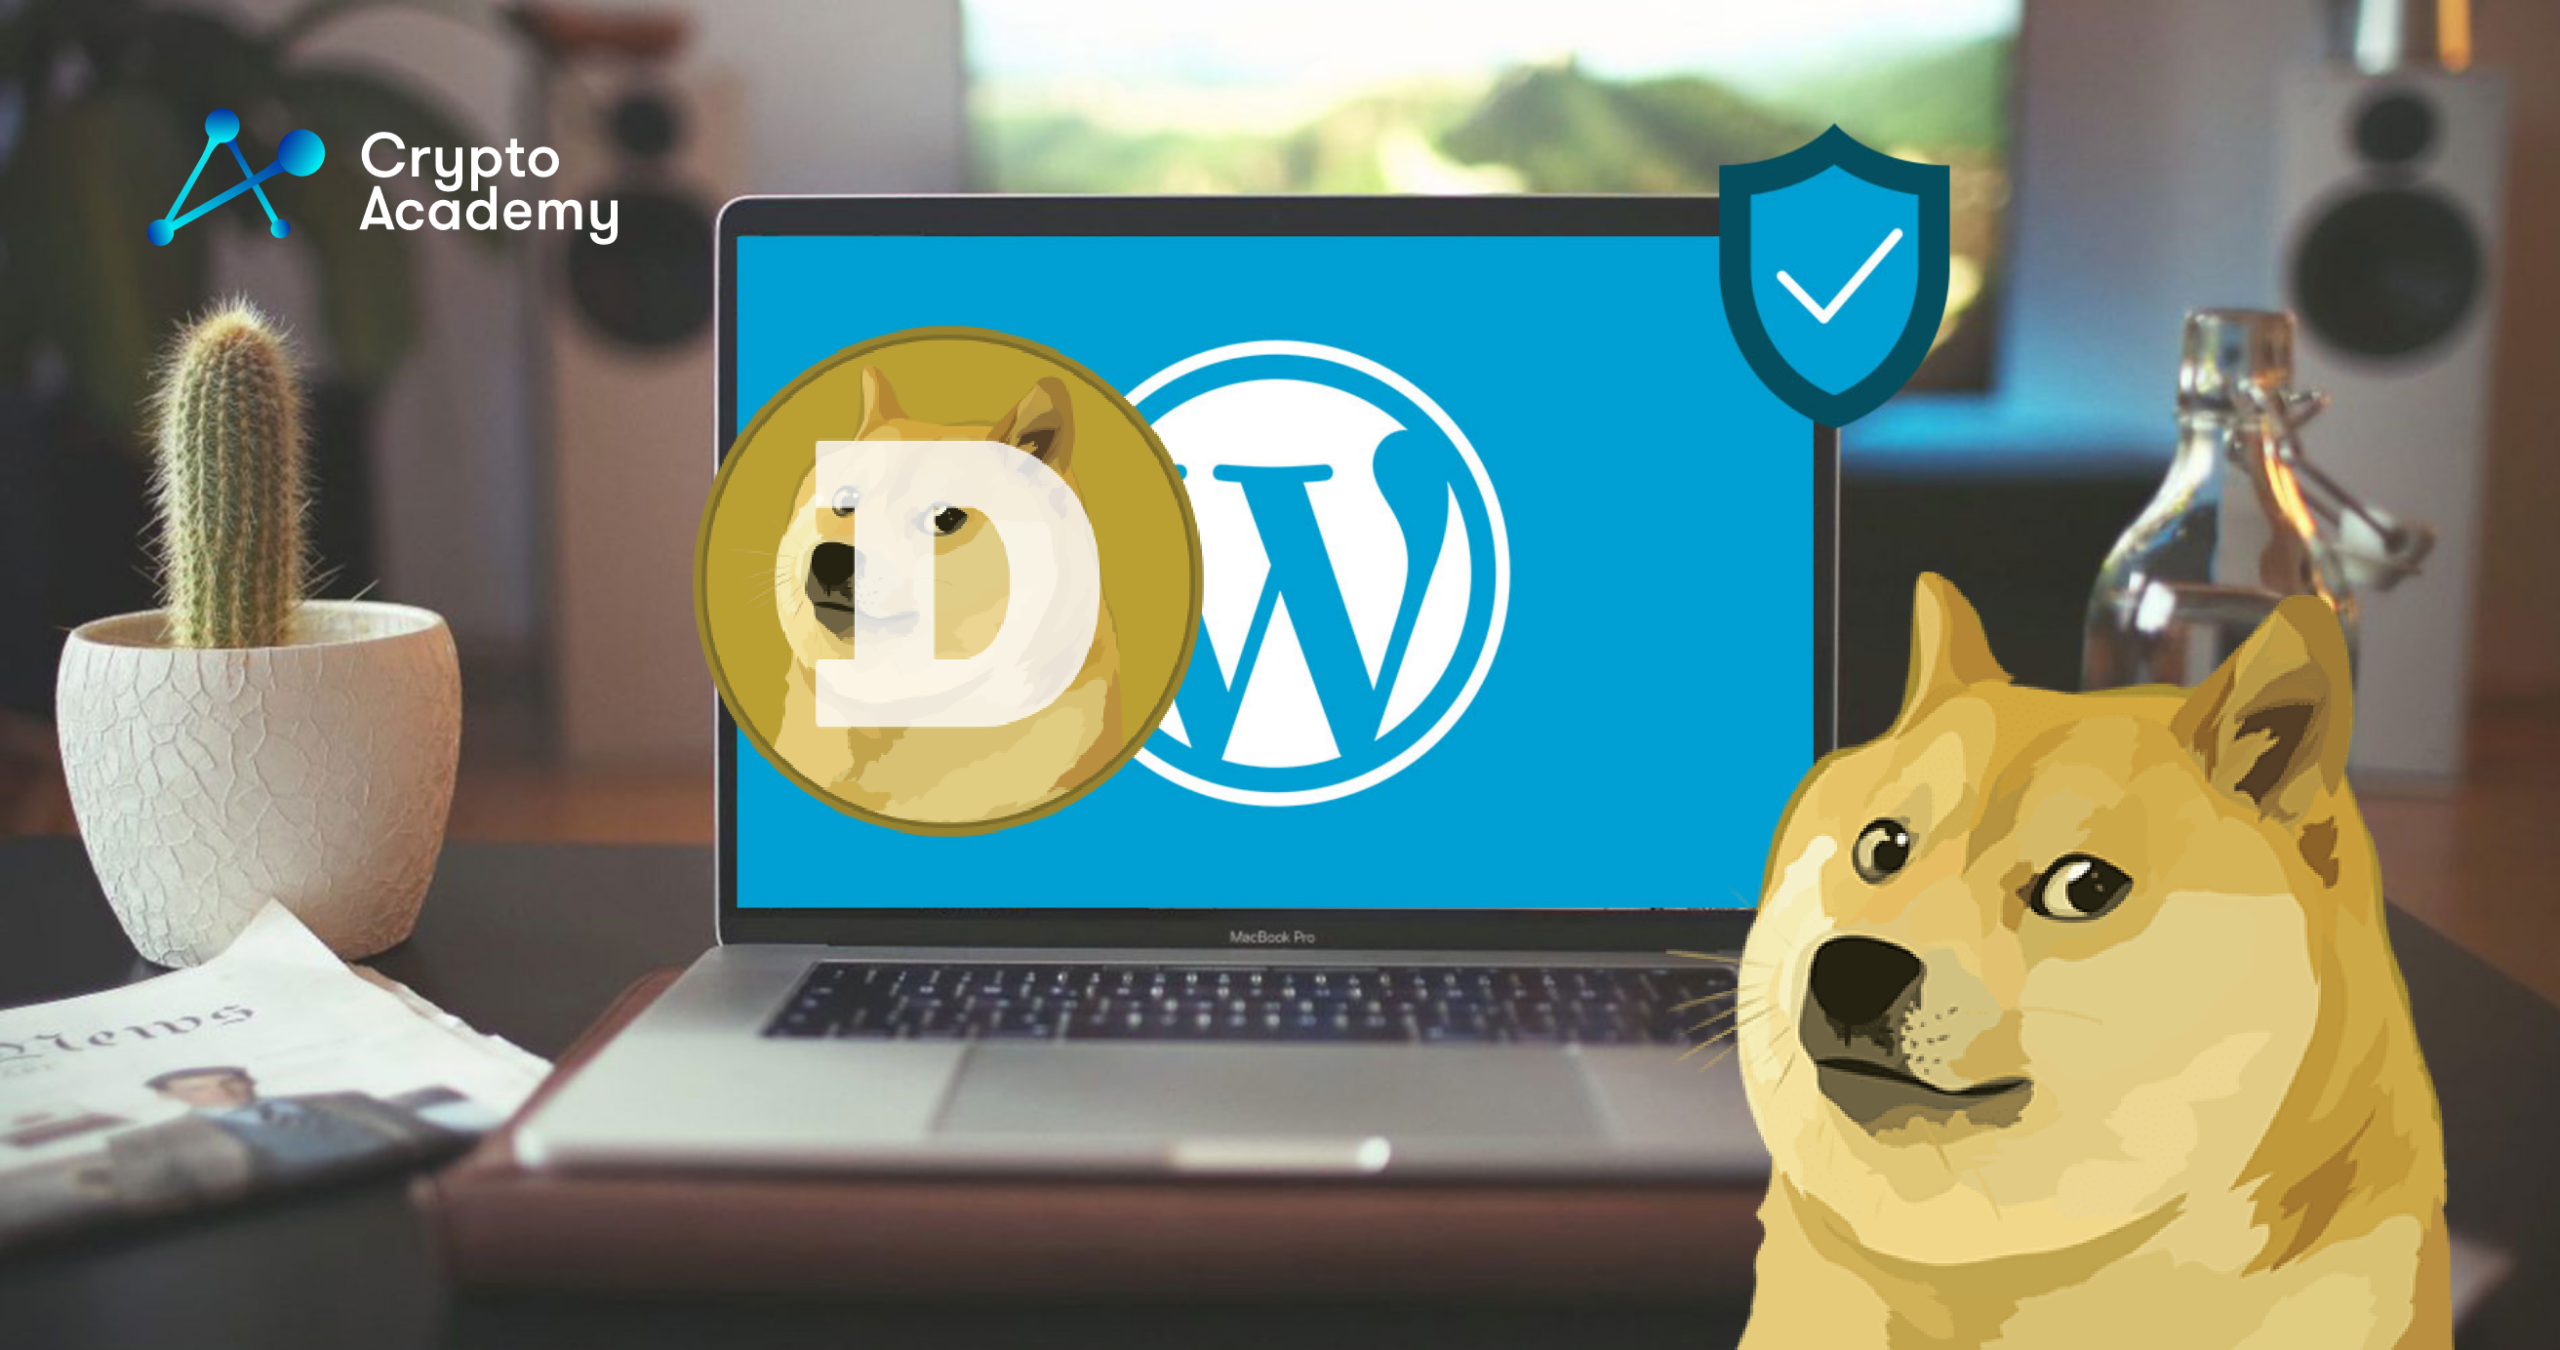 WordPress Websites Can Now Support DOGE Payments, Expanding Dogecoin Use Cases